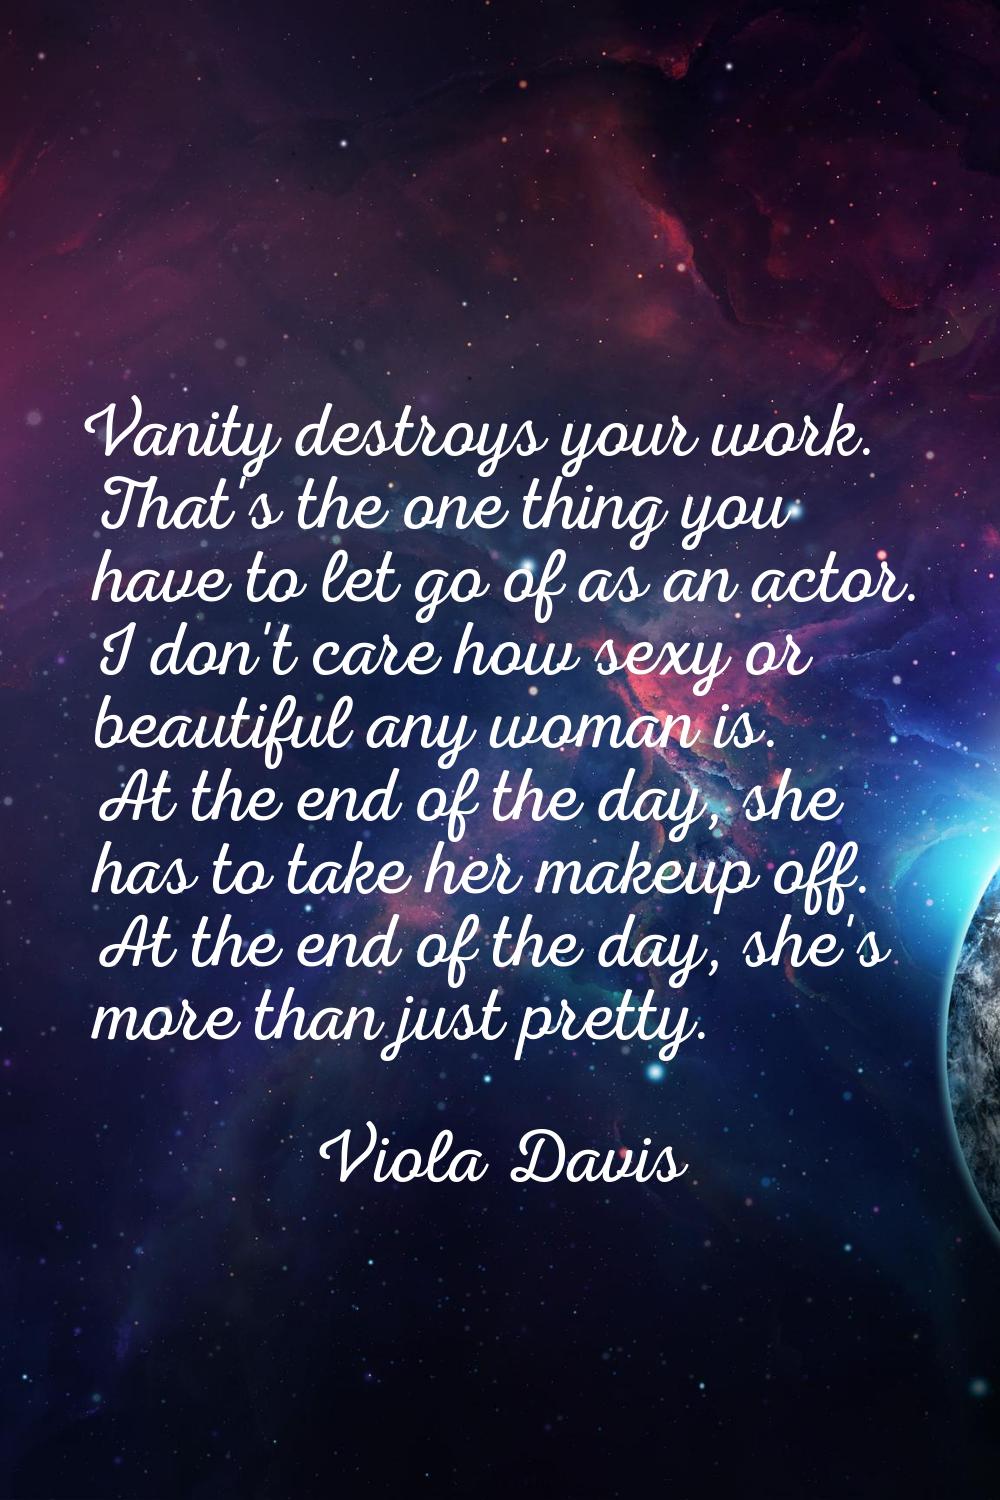 Vanity destroys your work. That's the one thing you have to let go of as an actor. I don't care how